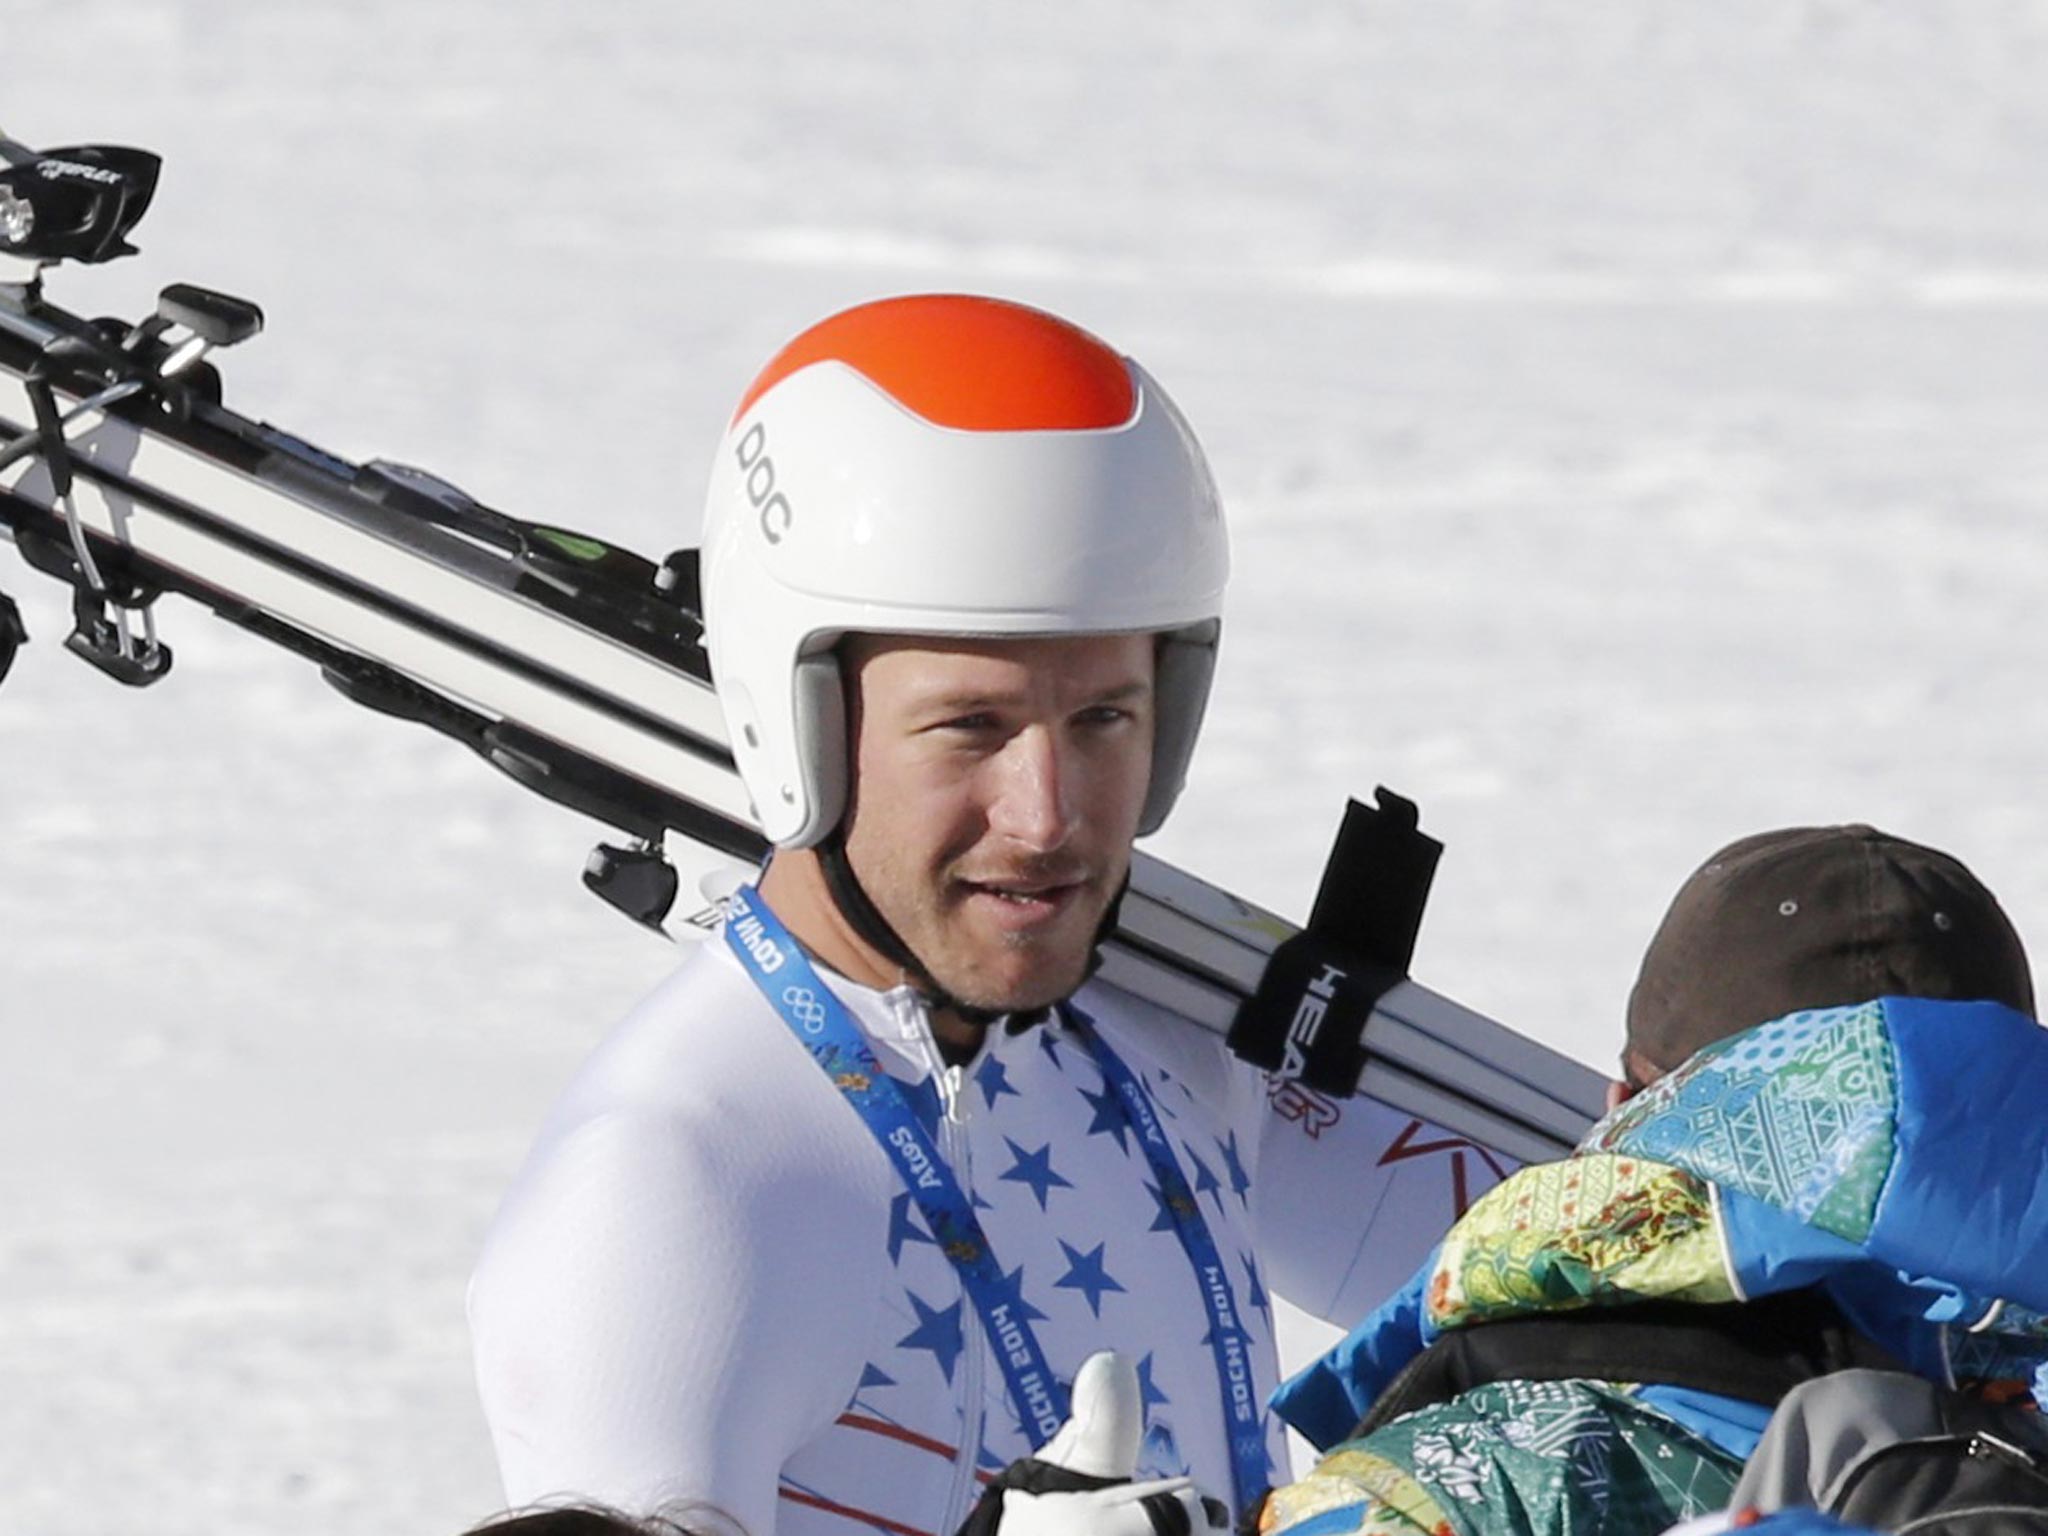 Bode Miller was fastest in practice but struggled in cloudy conditions during yesterday’s downhill race